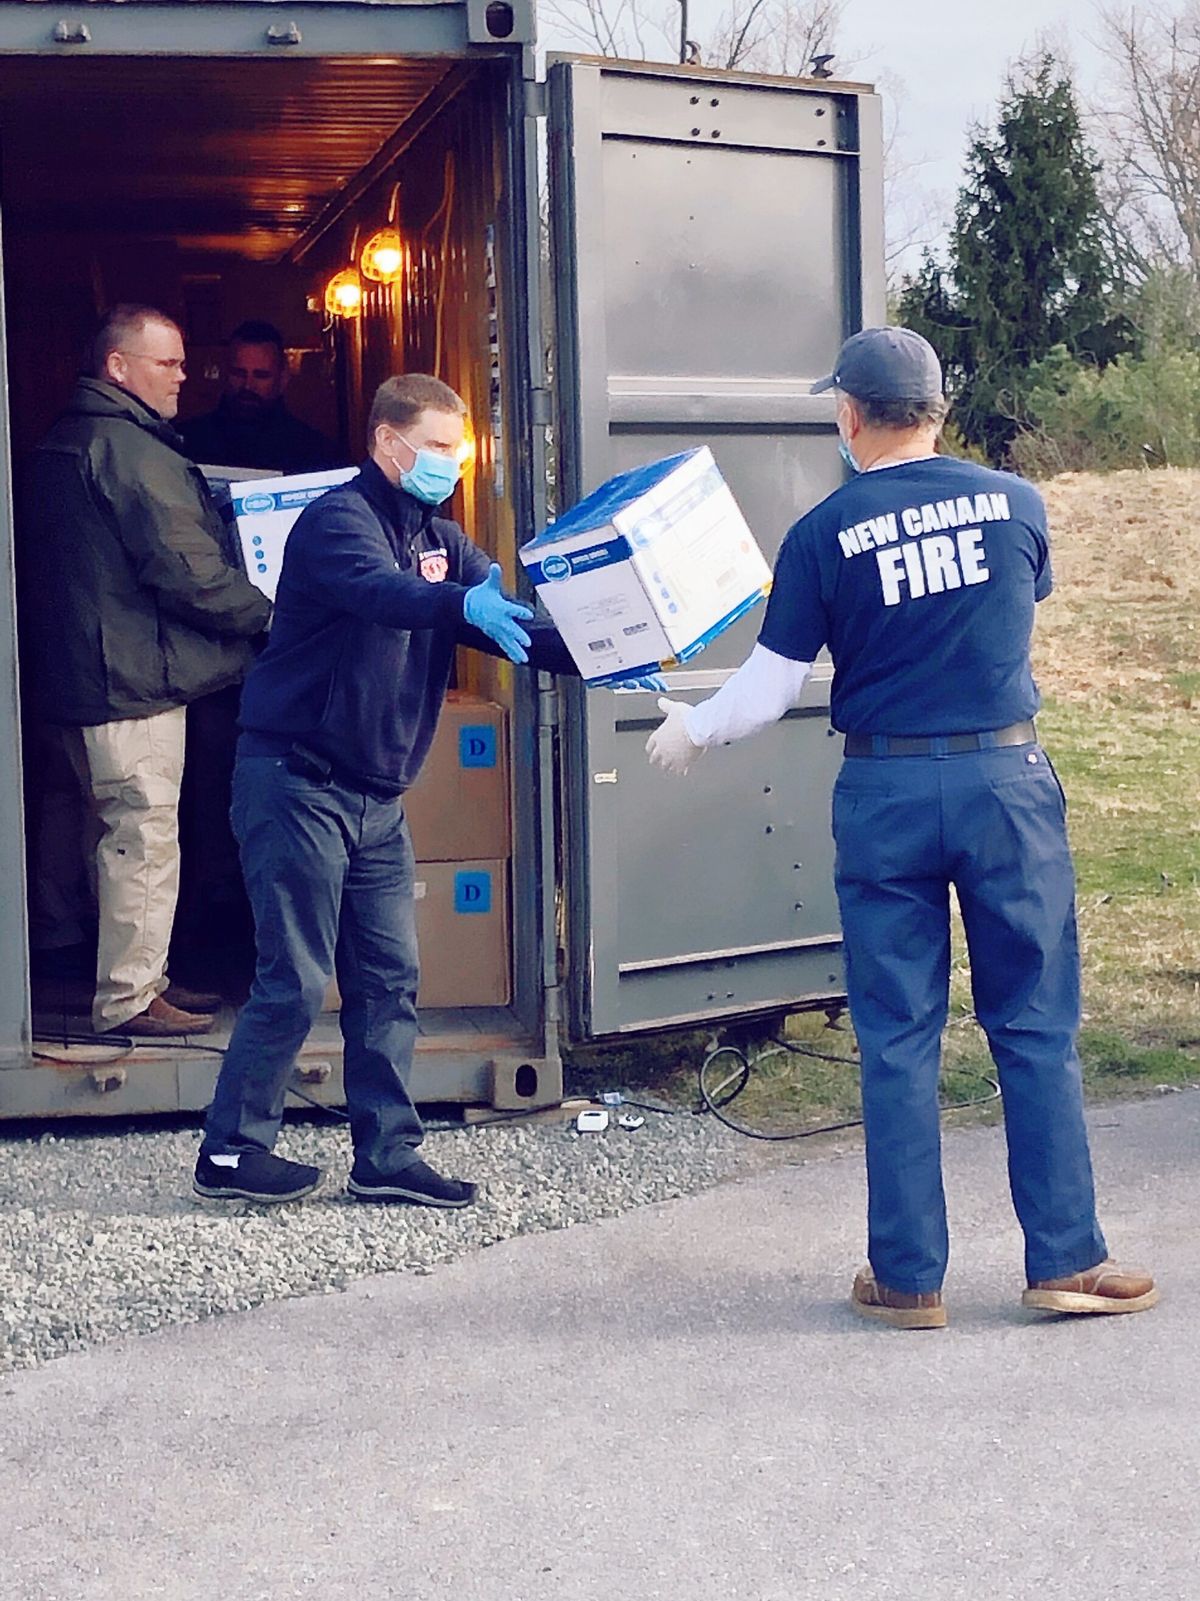 The New Canaan Fire Department picks up PPEs at Grace Farms in Connecticut for distribution to healthcare workers and first responders in the area. Courtesy of Grace Farms